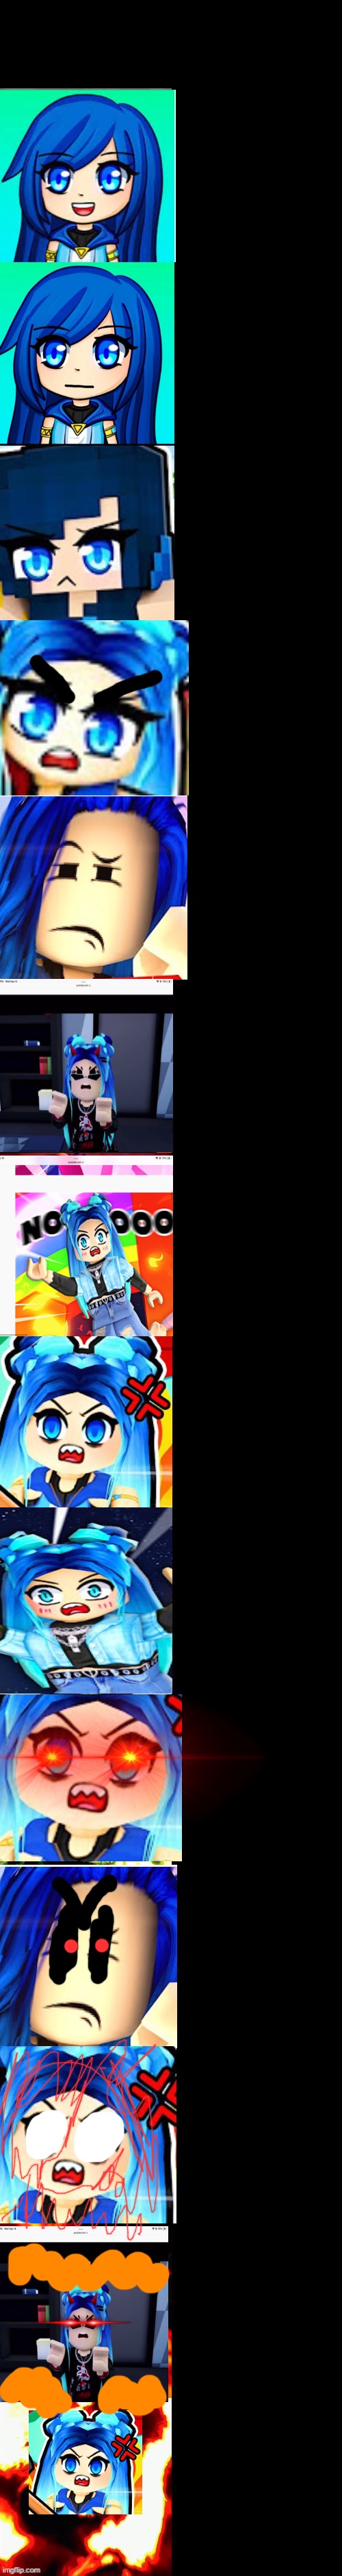 High Quality Itsfunneh becoming Angry (Extended) Blank Meme Template